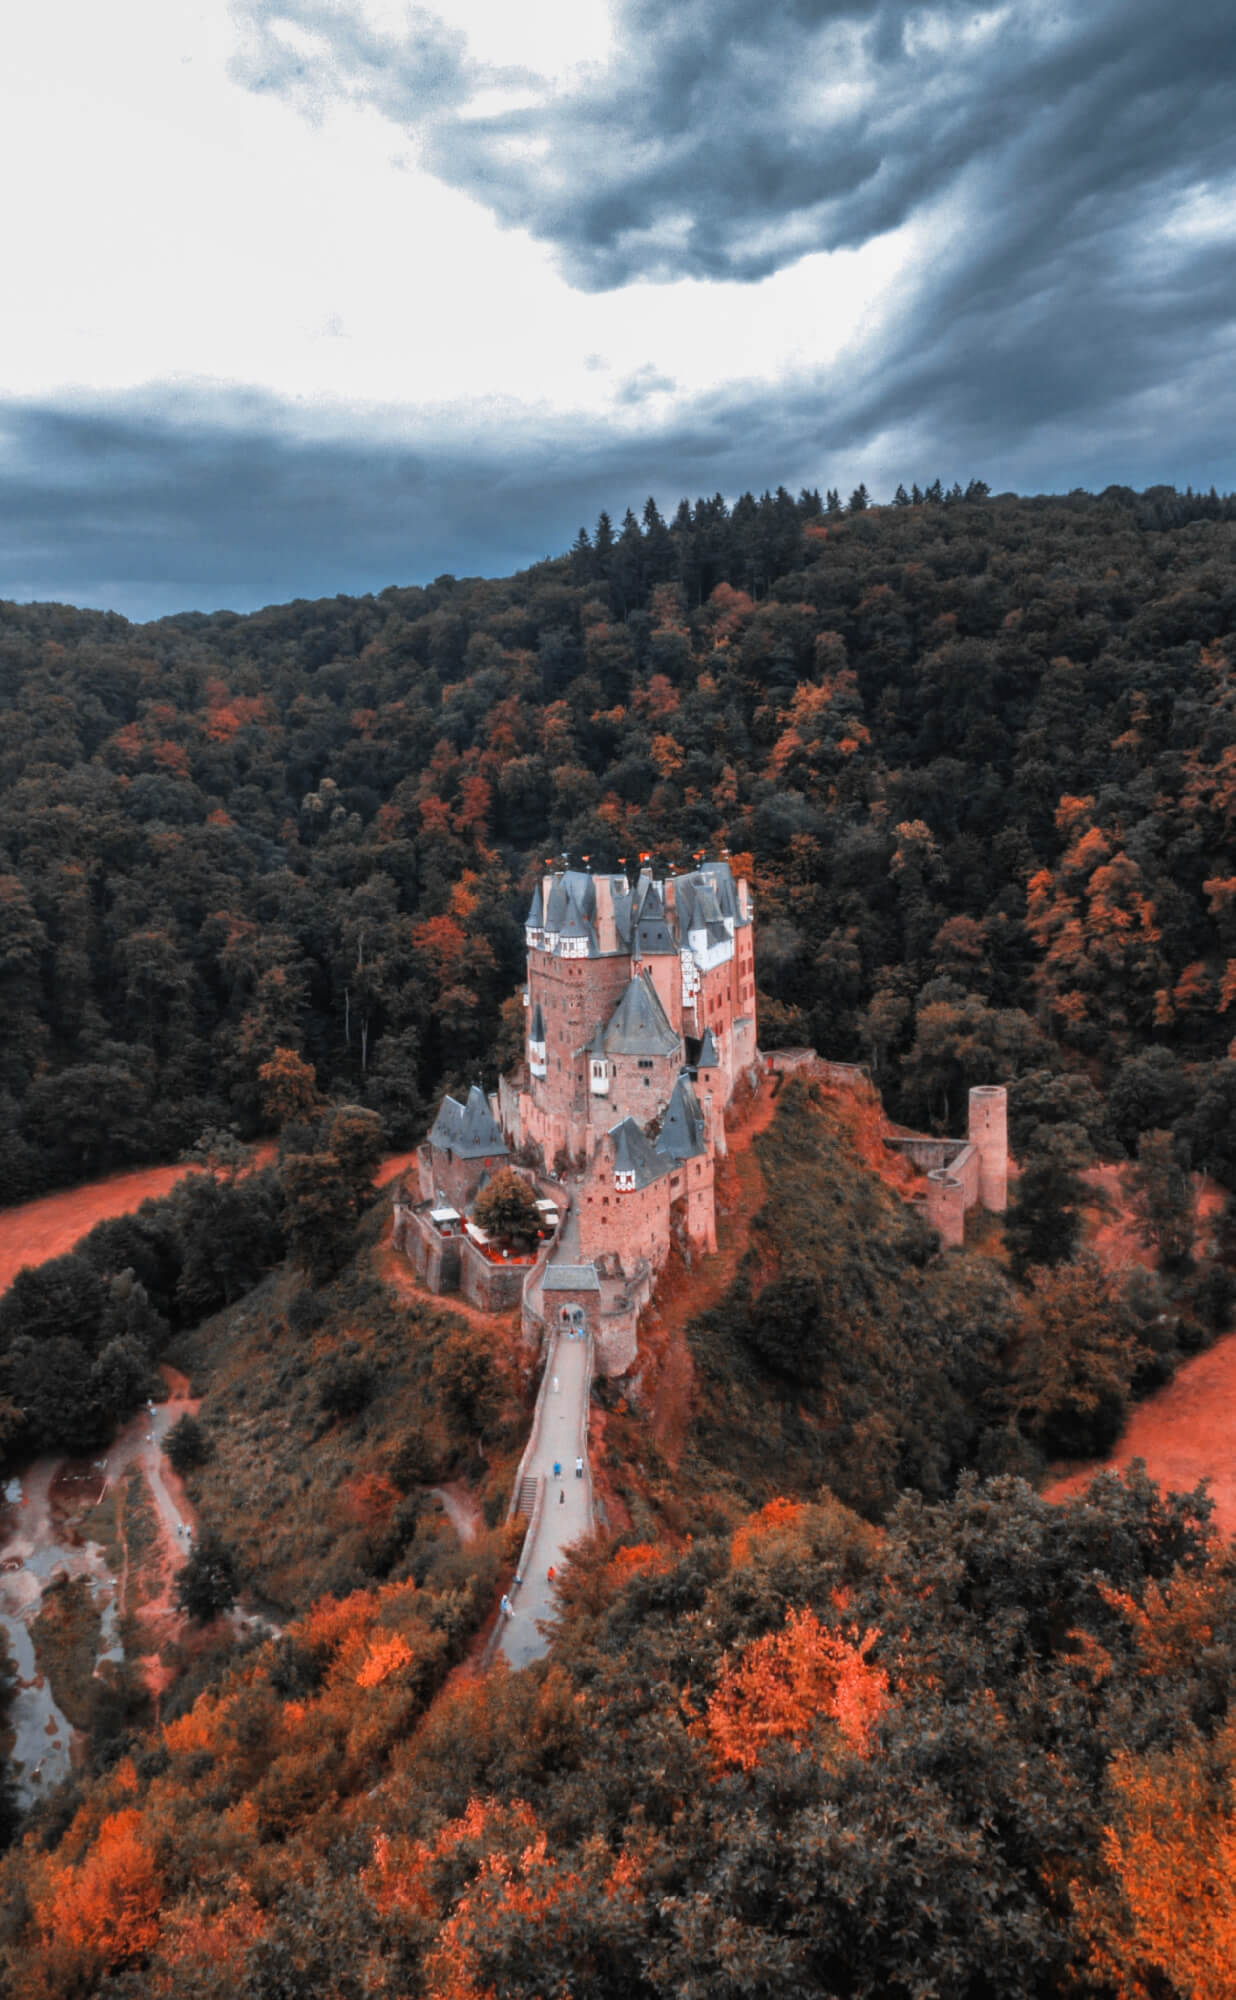 Best Castles In The World